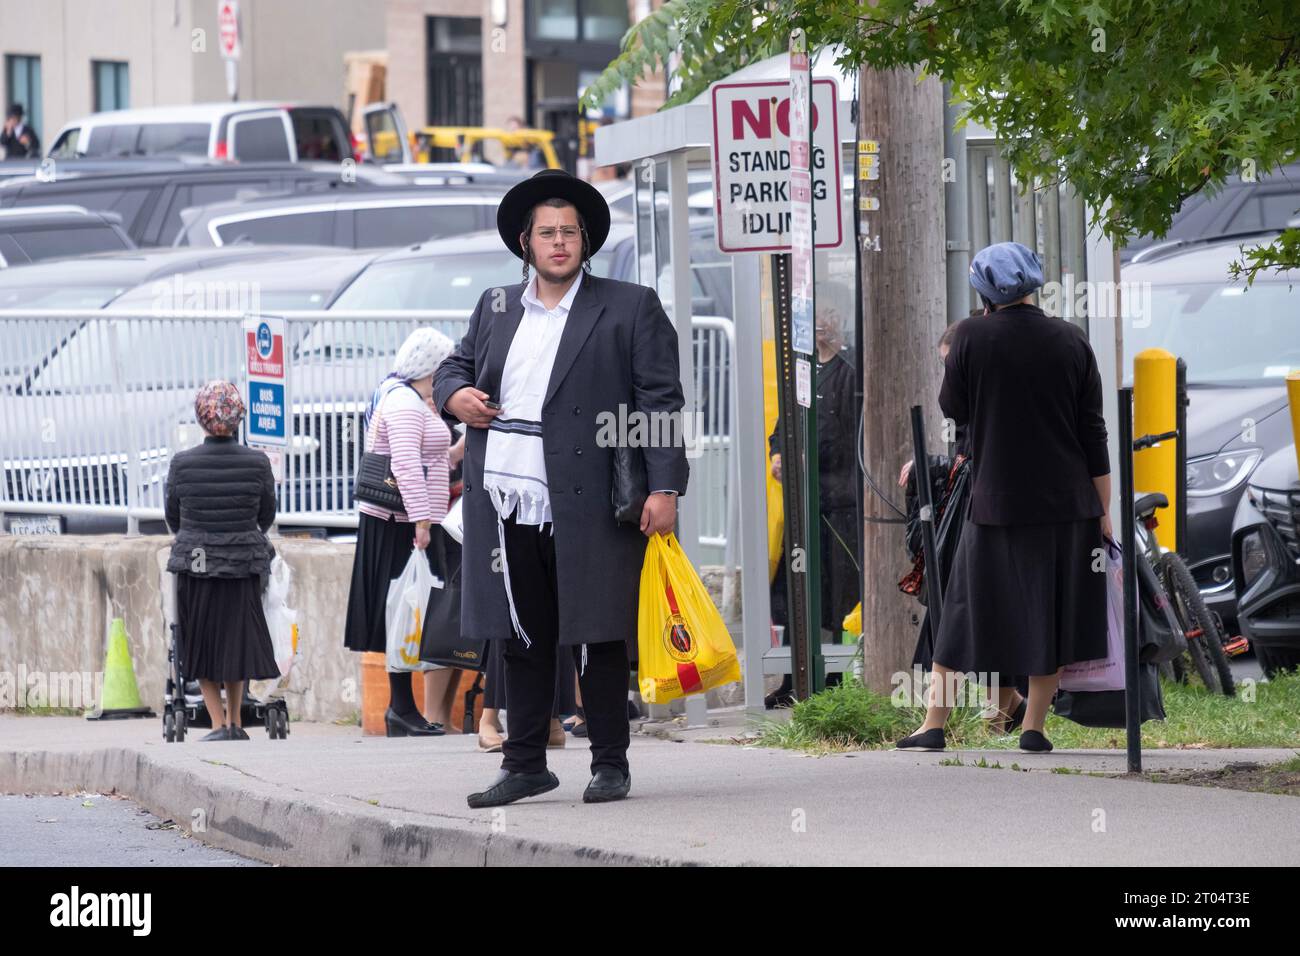 A hasidic Jewish man waits for a bus outside the Kiryas Joel Shopping Center on Forest Avenue. Respectfully, he stands apart from the women. Stock Photo